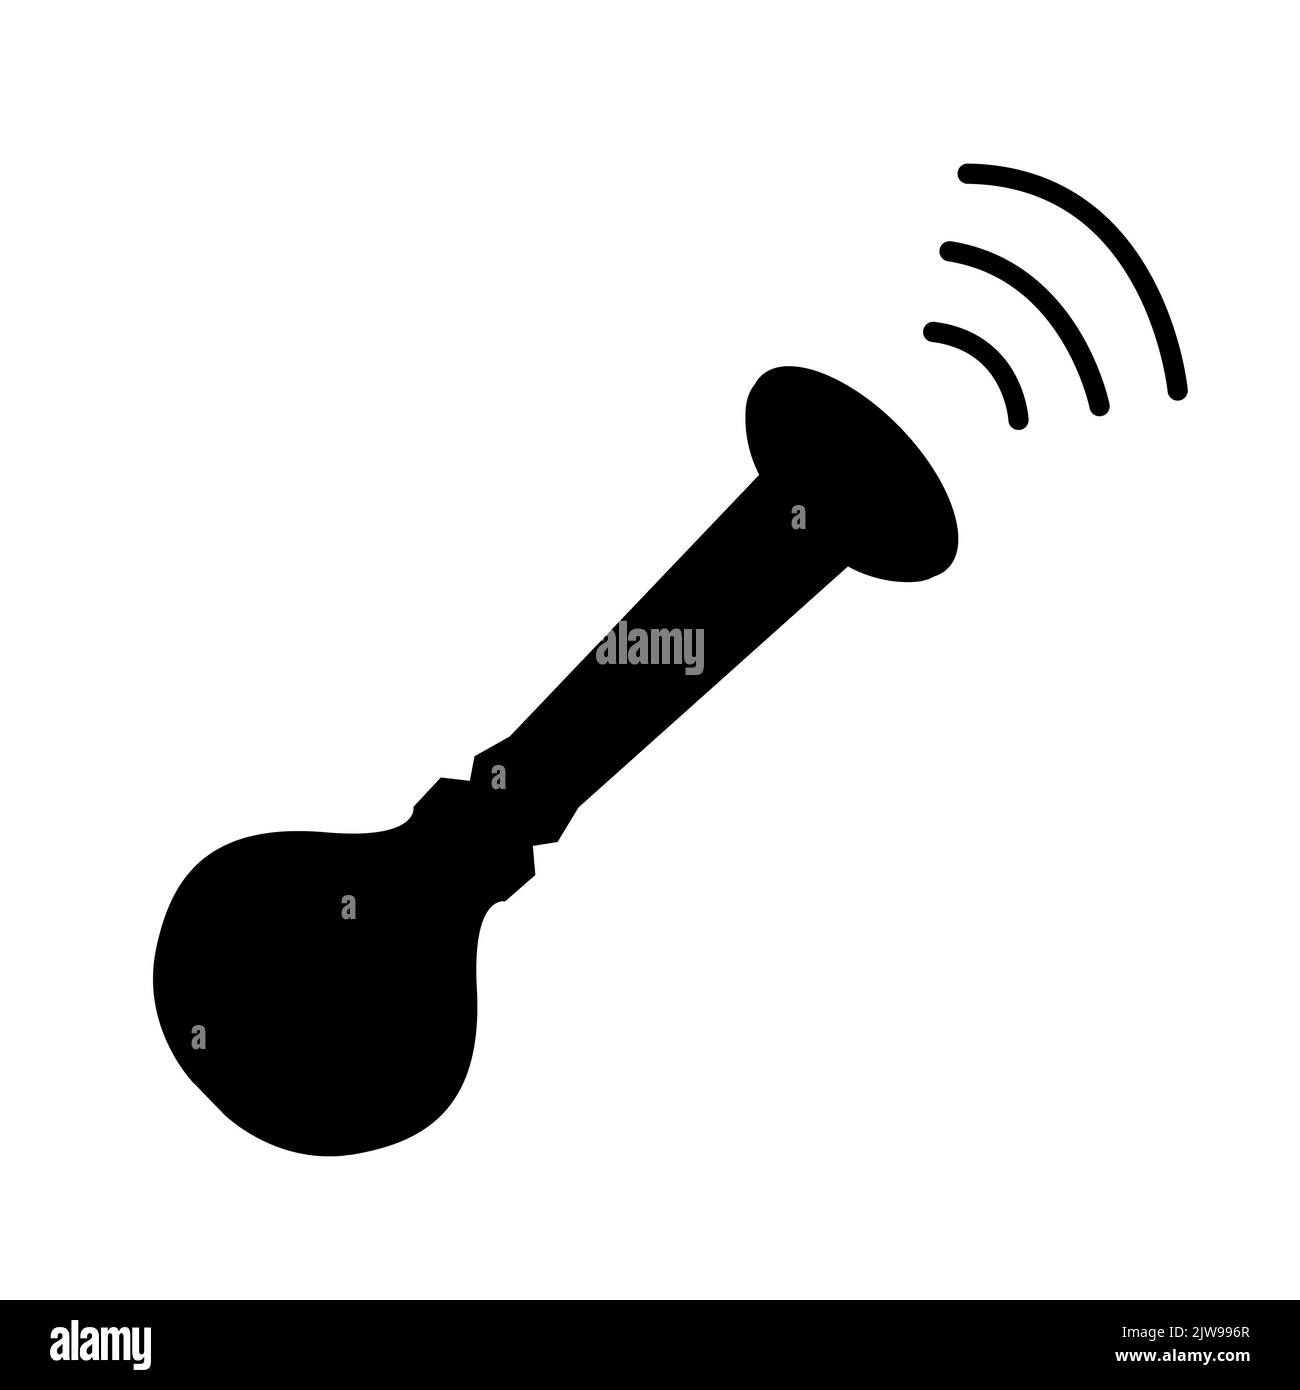 The beep Black and White Stock Photos & Images - Alamy